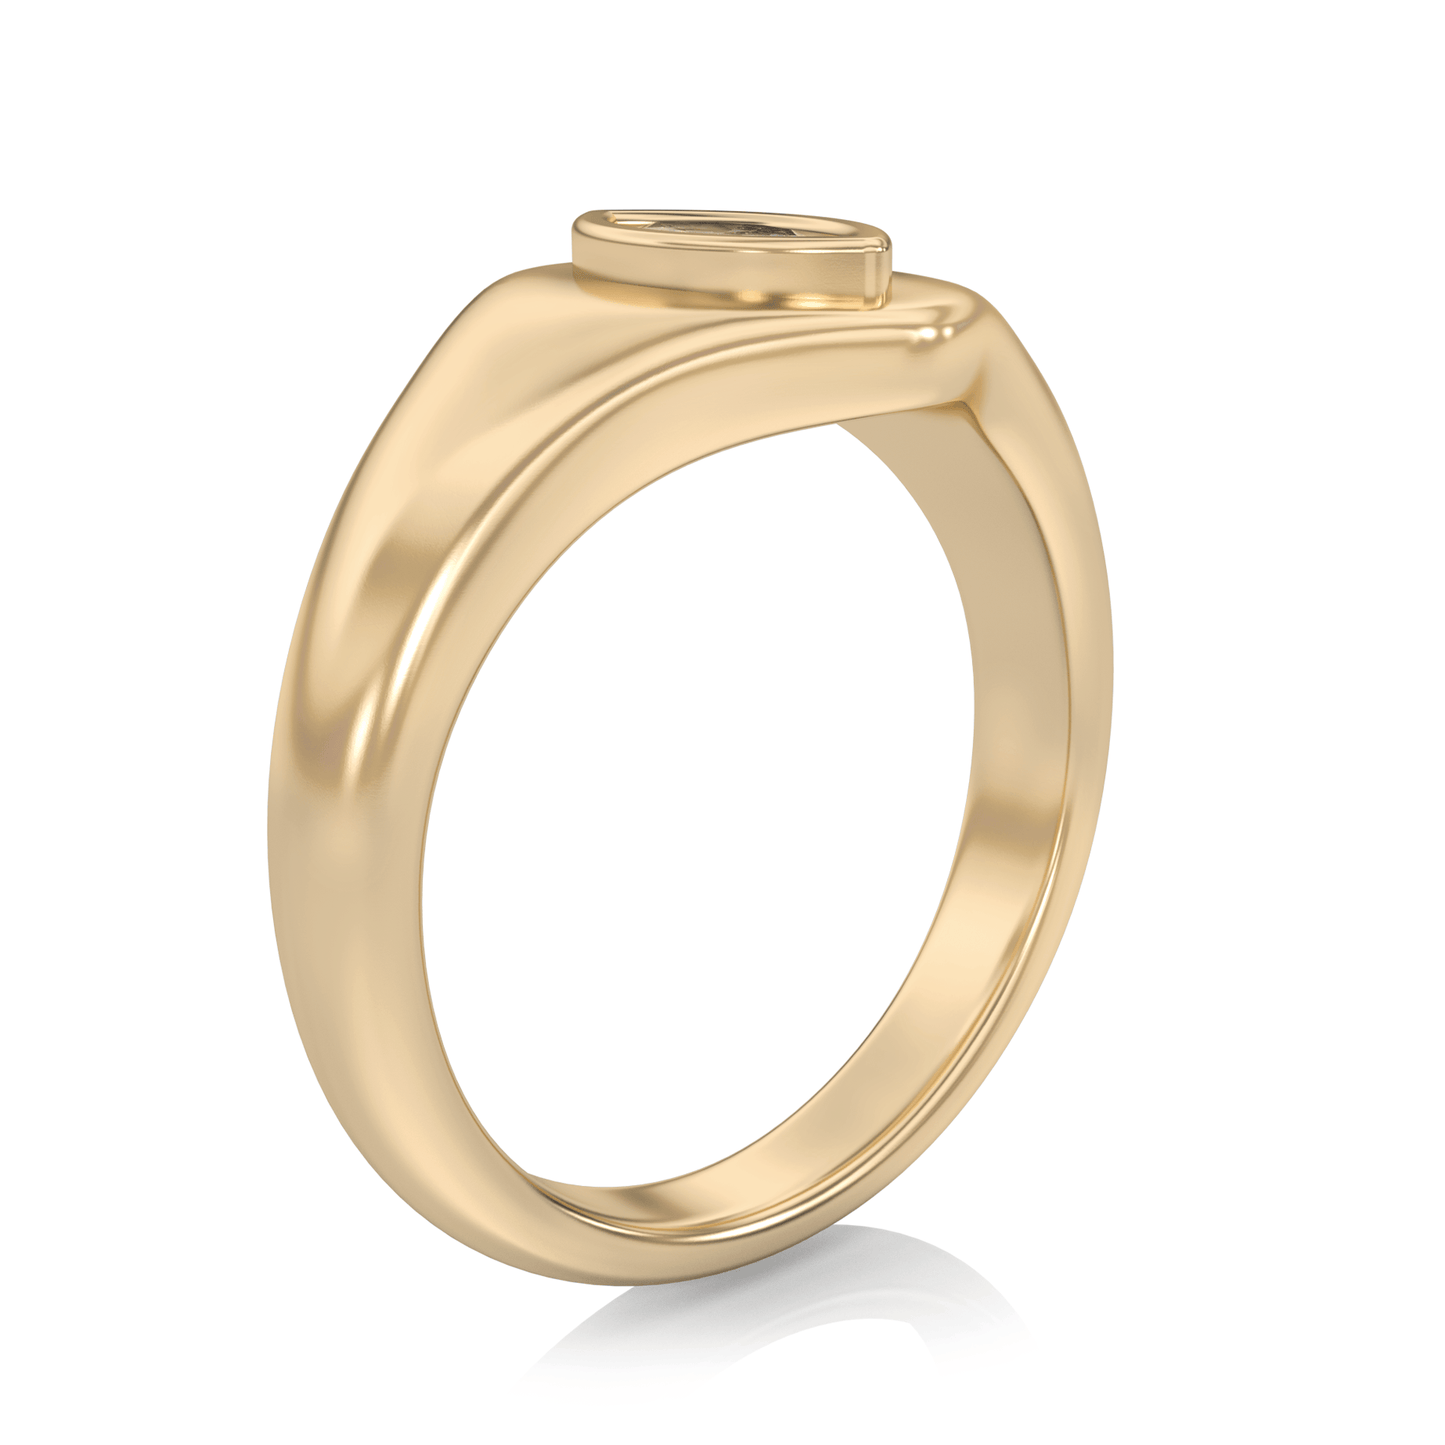 Signet Marquise Diamond Ring in 14k Gold